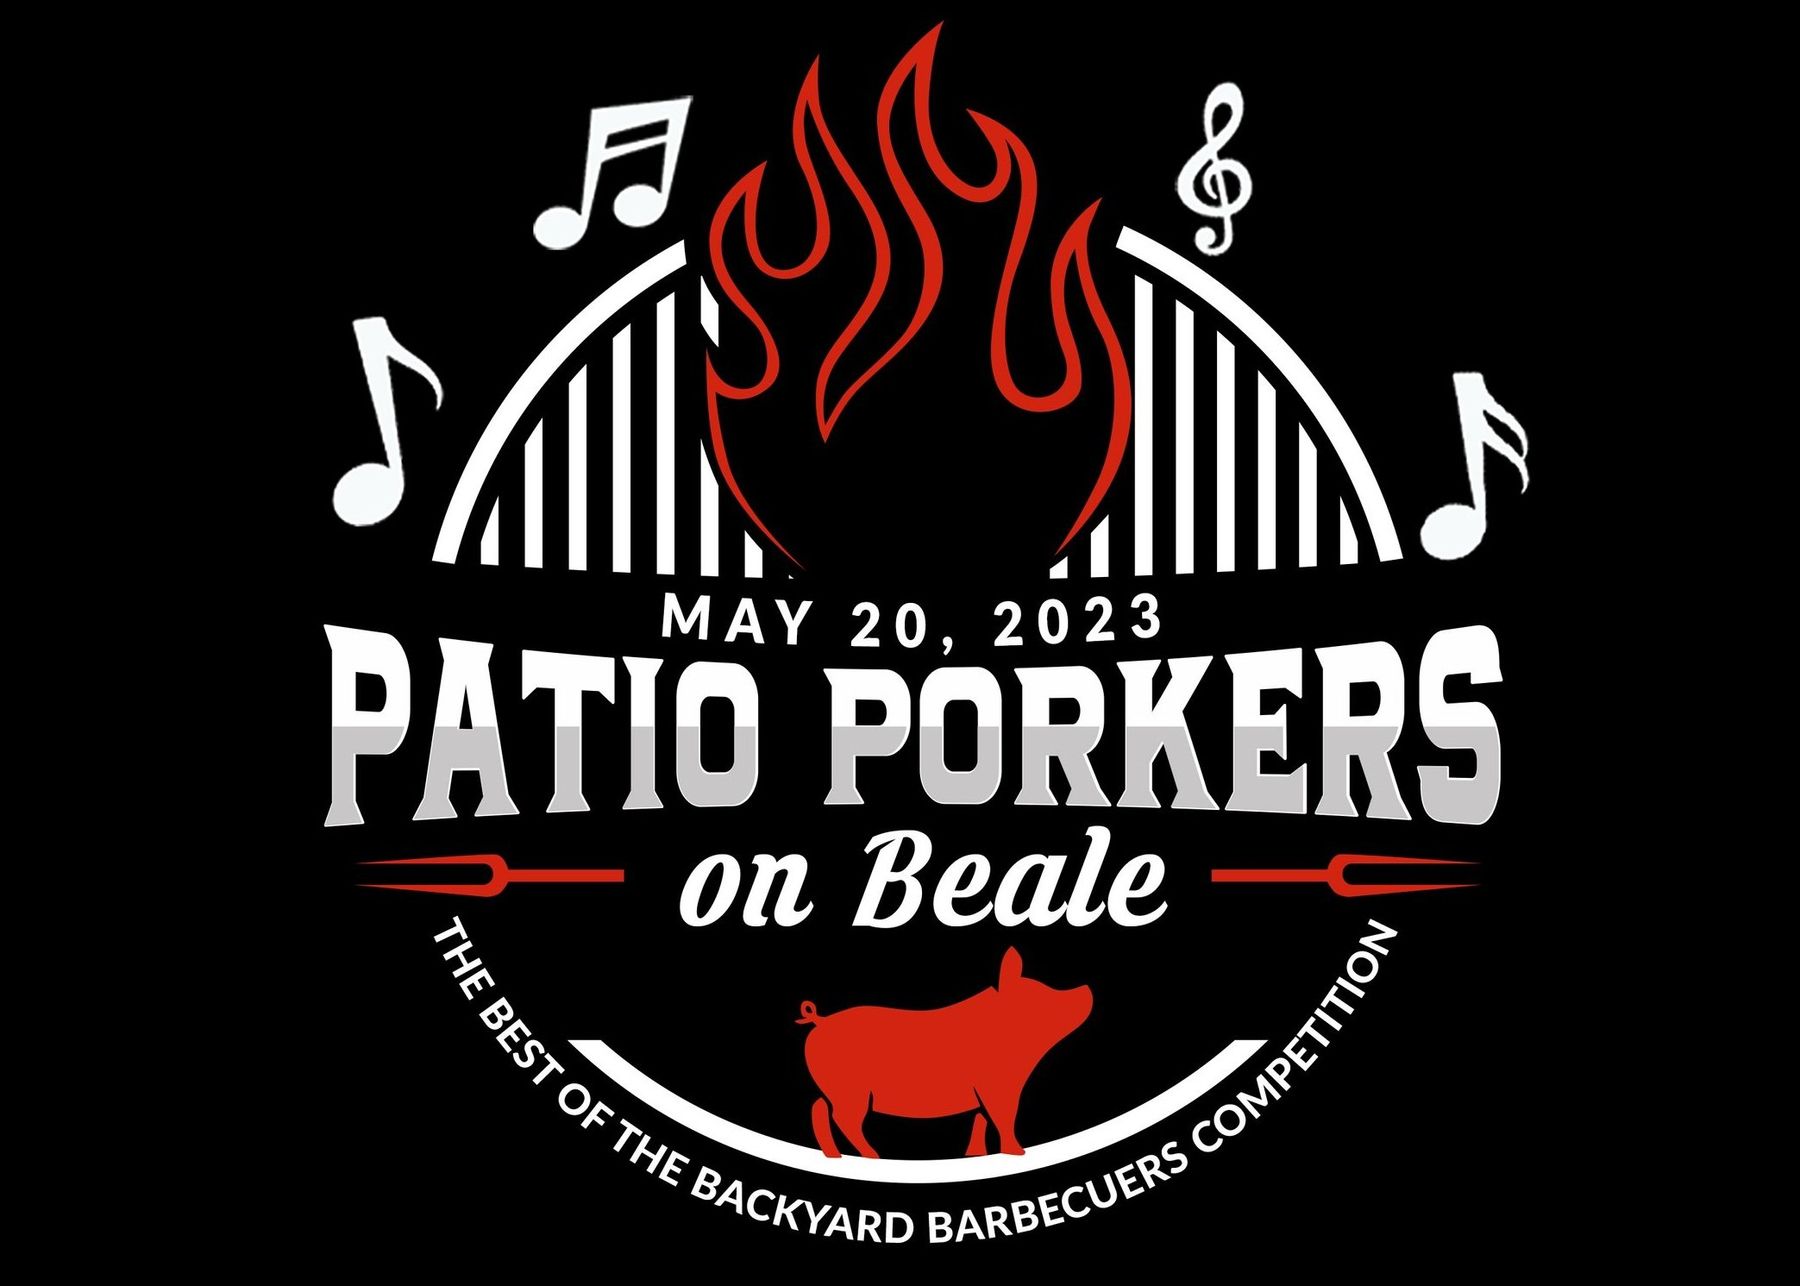 Patio Porkers on Beale